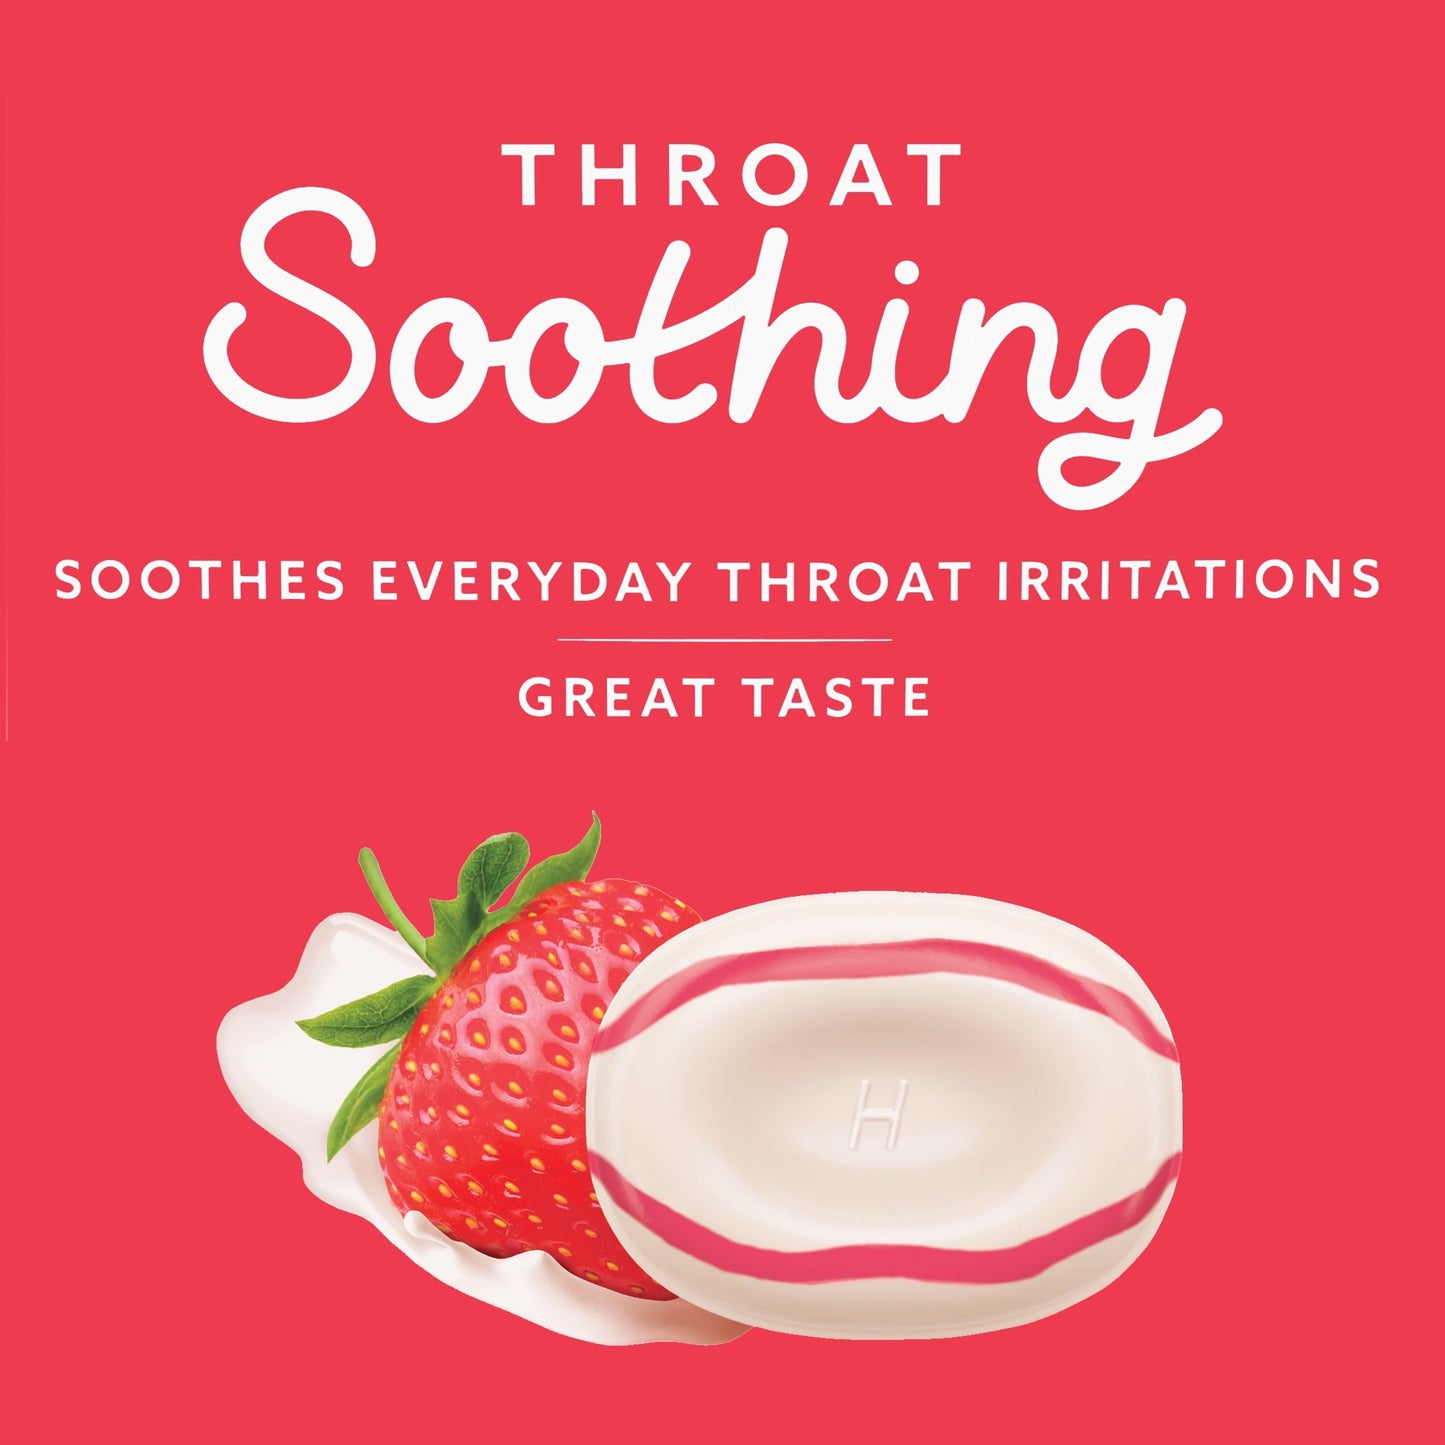 HALLS Throat Soothing Creamy Strawberry Throat Drops, Economy Pack, 70 Drops